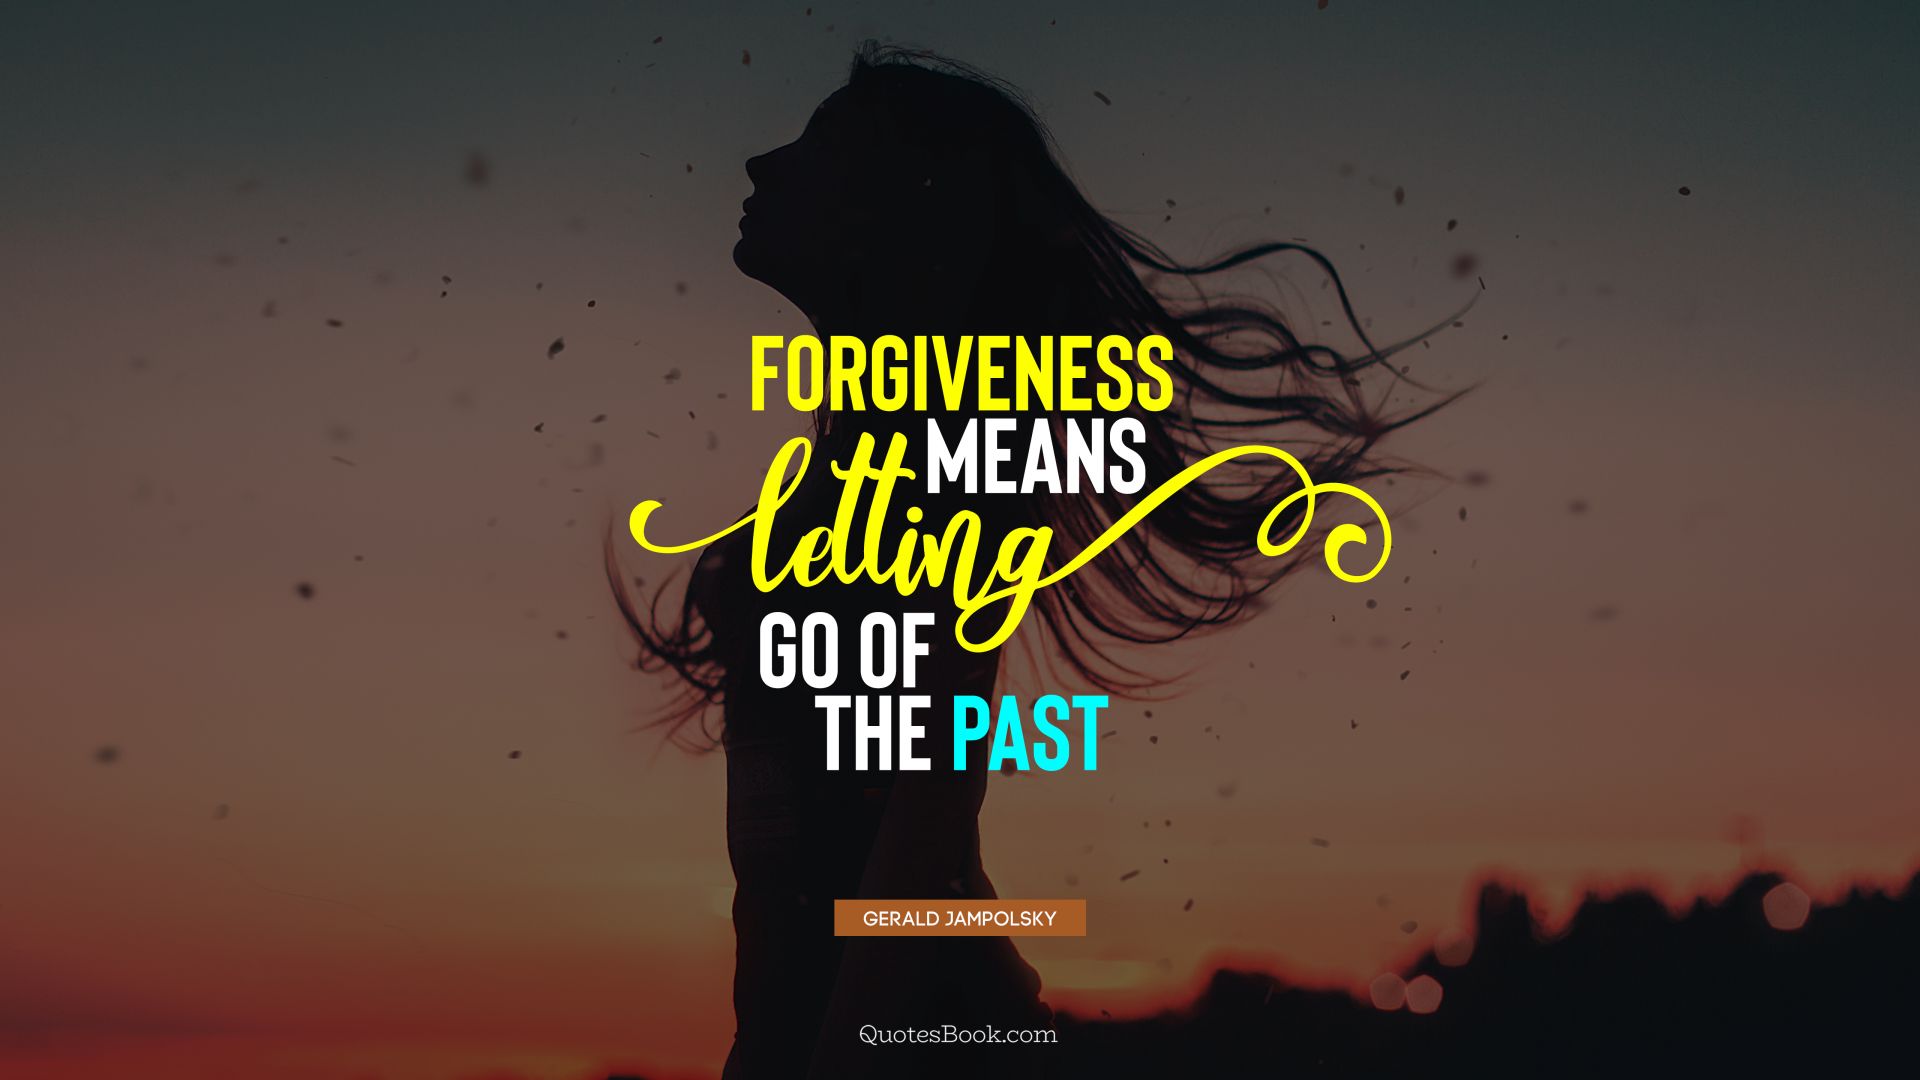 Forgiveness means letting go of the past. - Quote by Gerald Jampolsky